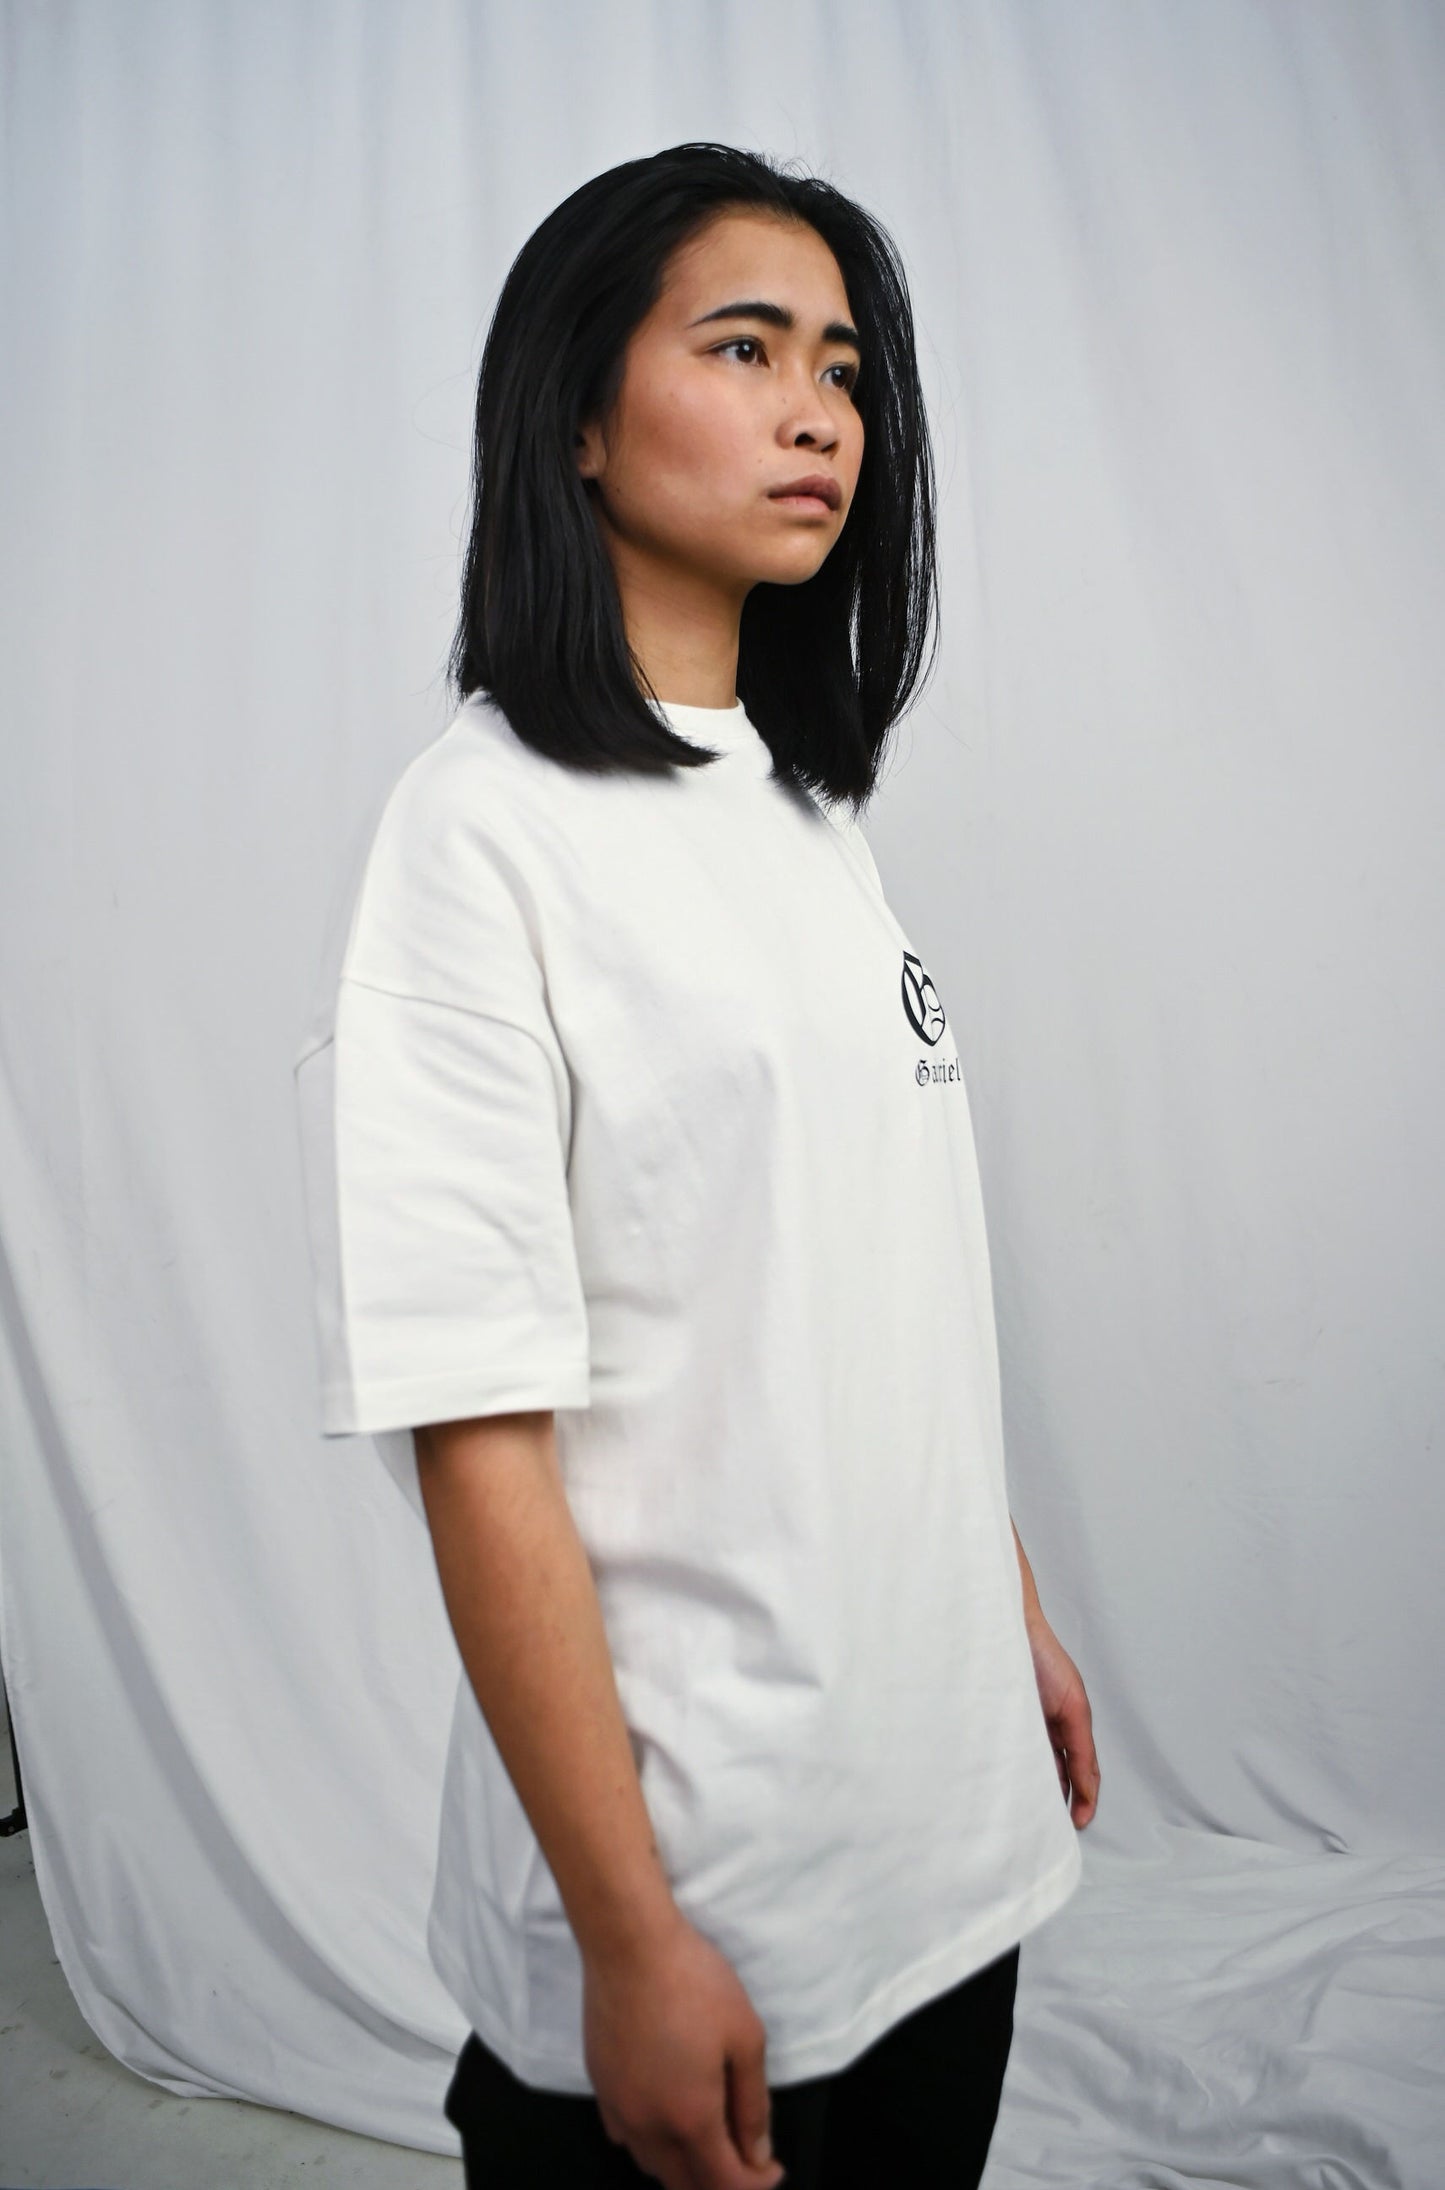 Female model wearing a white oversize Tshirt with brand design on the front